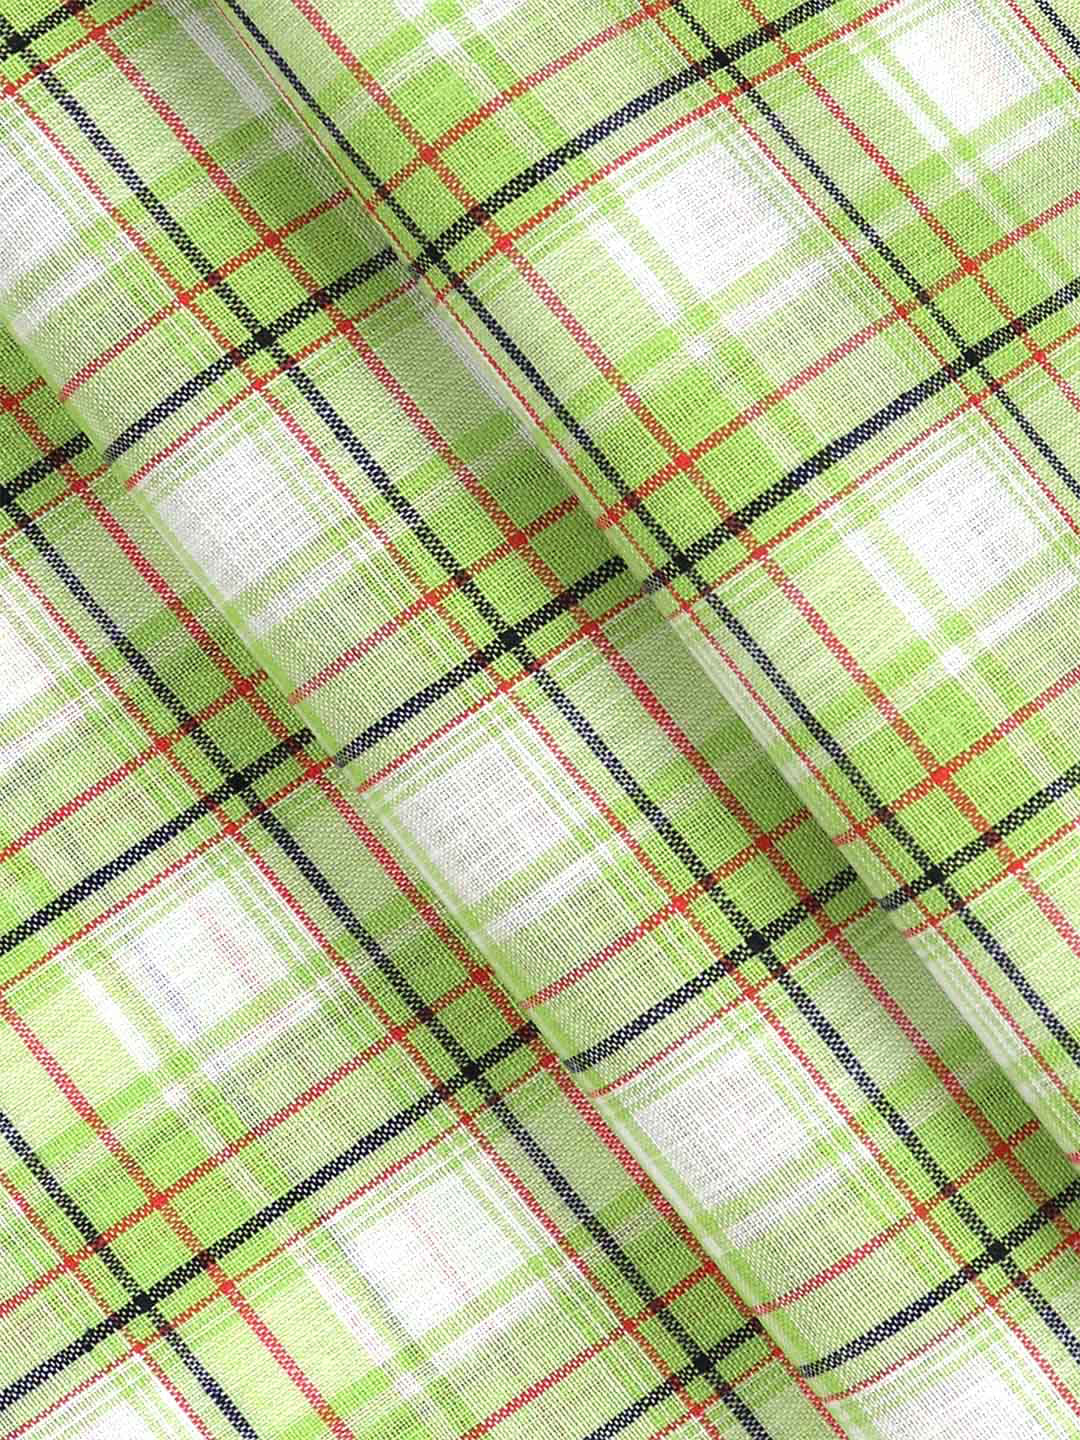 Cotton Green with White Checked Shirt Fabric Infinity